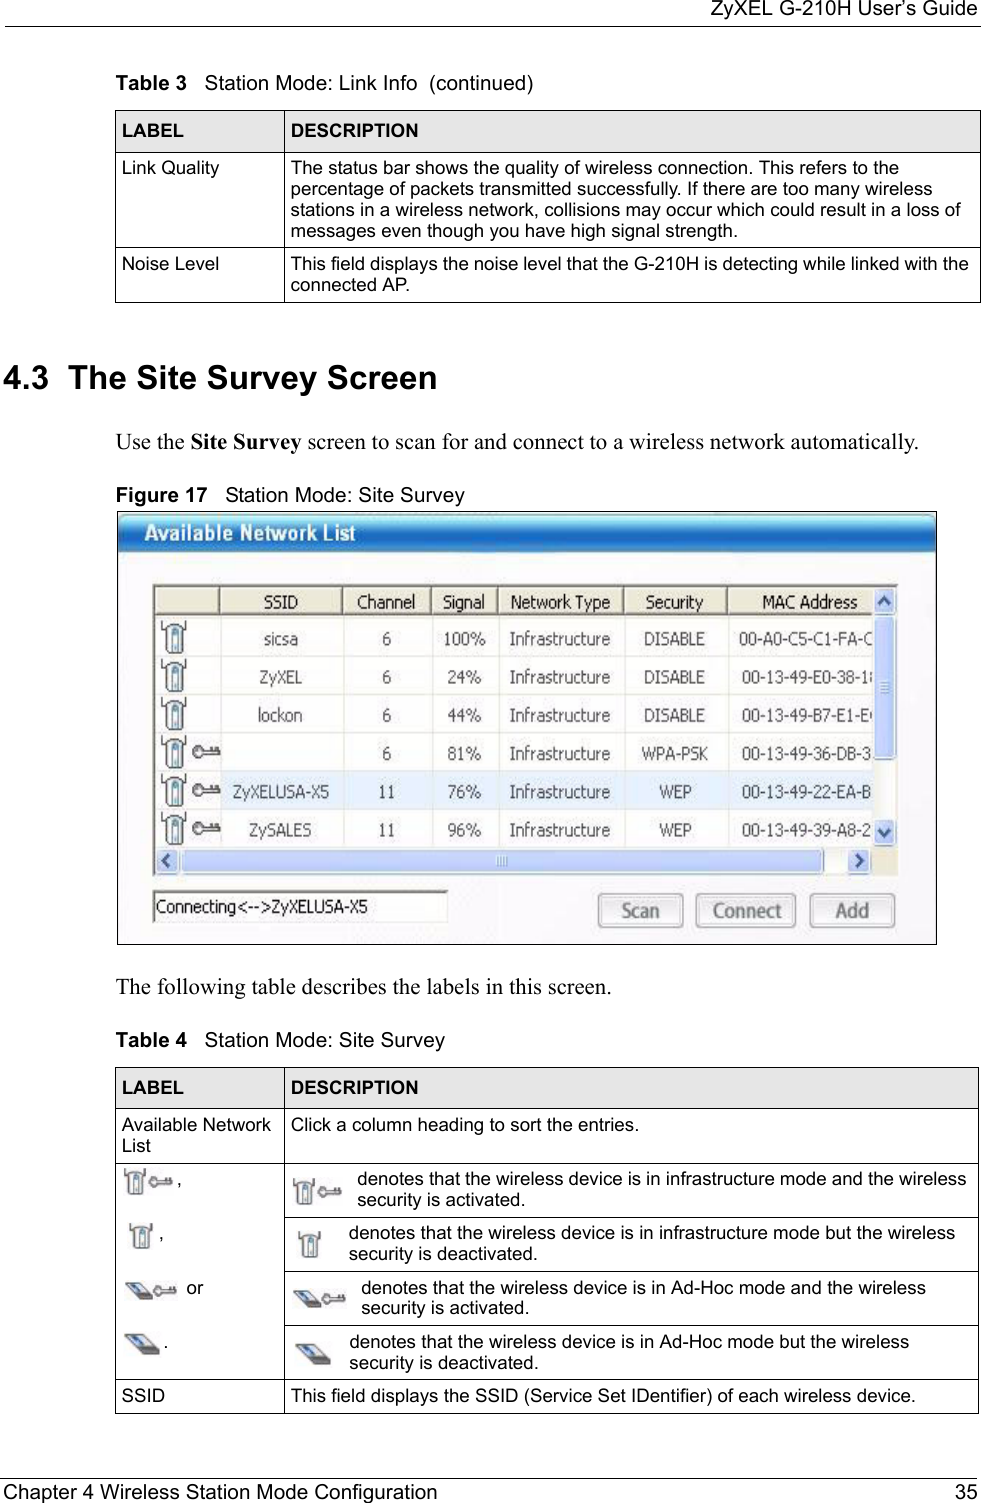 ZyXEL G-210H User’s GuideChapter 4 Wireless Station Mode Configuration 354.3  The Site Survey Screen Use the Site Survey screen to scan for and connect to a wireless network automatically.Figure 17   Station Mode: Site Survey The following table describes the labels in this screen. Link Quality  The status bar shows the quality of wireless connection. This refers to the percentage of packets transmitted successfully. If there are too many wireless stations in a wireless network, collisions may occur which could result in a loss of messages even though you have high signal strength.Noise Level This field displays the noise level that the G-210H is detecting while linked with the connected AP.Table 3   Station Mode: Link Info  (continued)LABEL DESCRIPTIONTable 4   Station Mode: Site Survey LABEL DESCRIPTIONAvailable Network ListClick a column heading to sort the entries., denotes that the wireless device is in infrastructure mode and the wireless security is activated., denotes that the wireless device is in infrastructure mode but the wireless security is deactivated. or denotes that the wireless device is in Ad-Hoc mode and the wireless security is activated.. denotes that the wireless device is in Ad-Hoc mode but the wireless security is deactivated.SSID This field displays the SSID (Service Set IDentifier) of each wireless device.